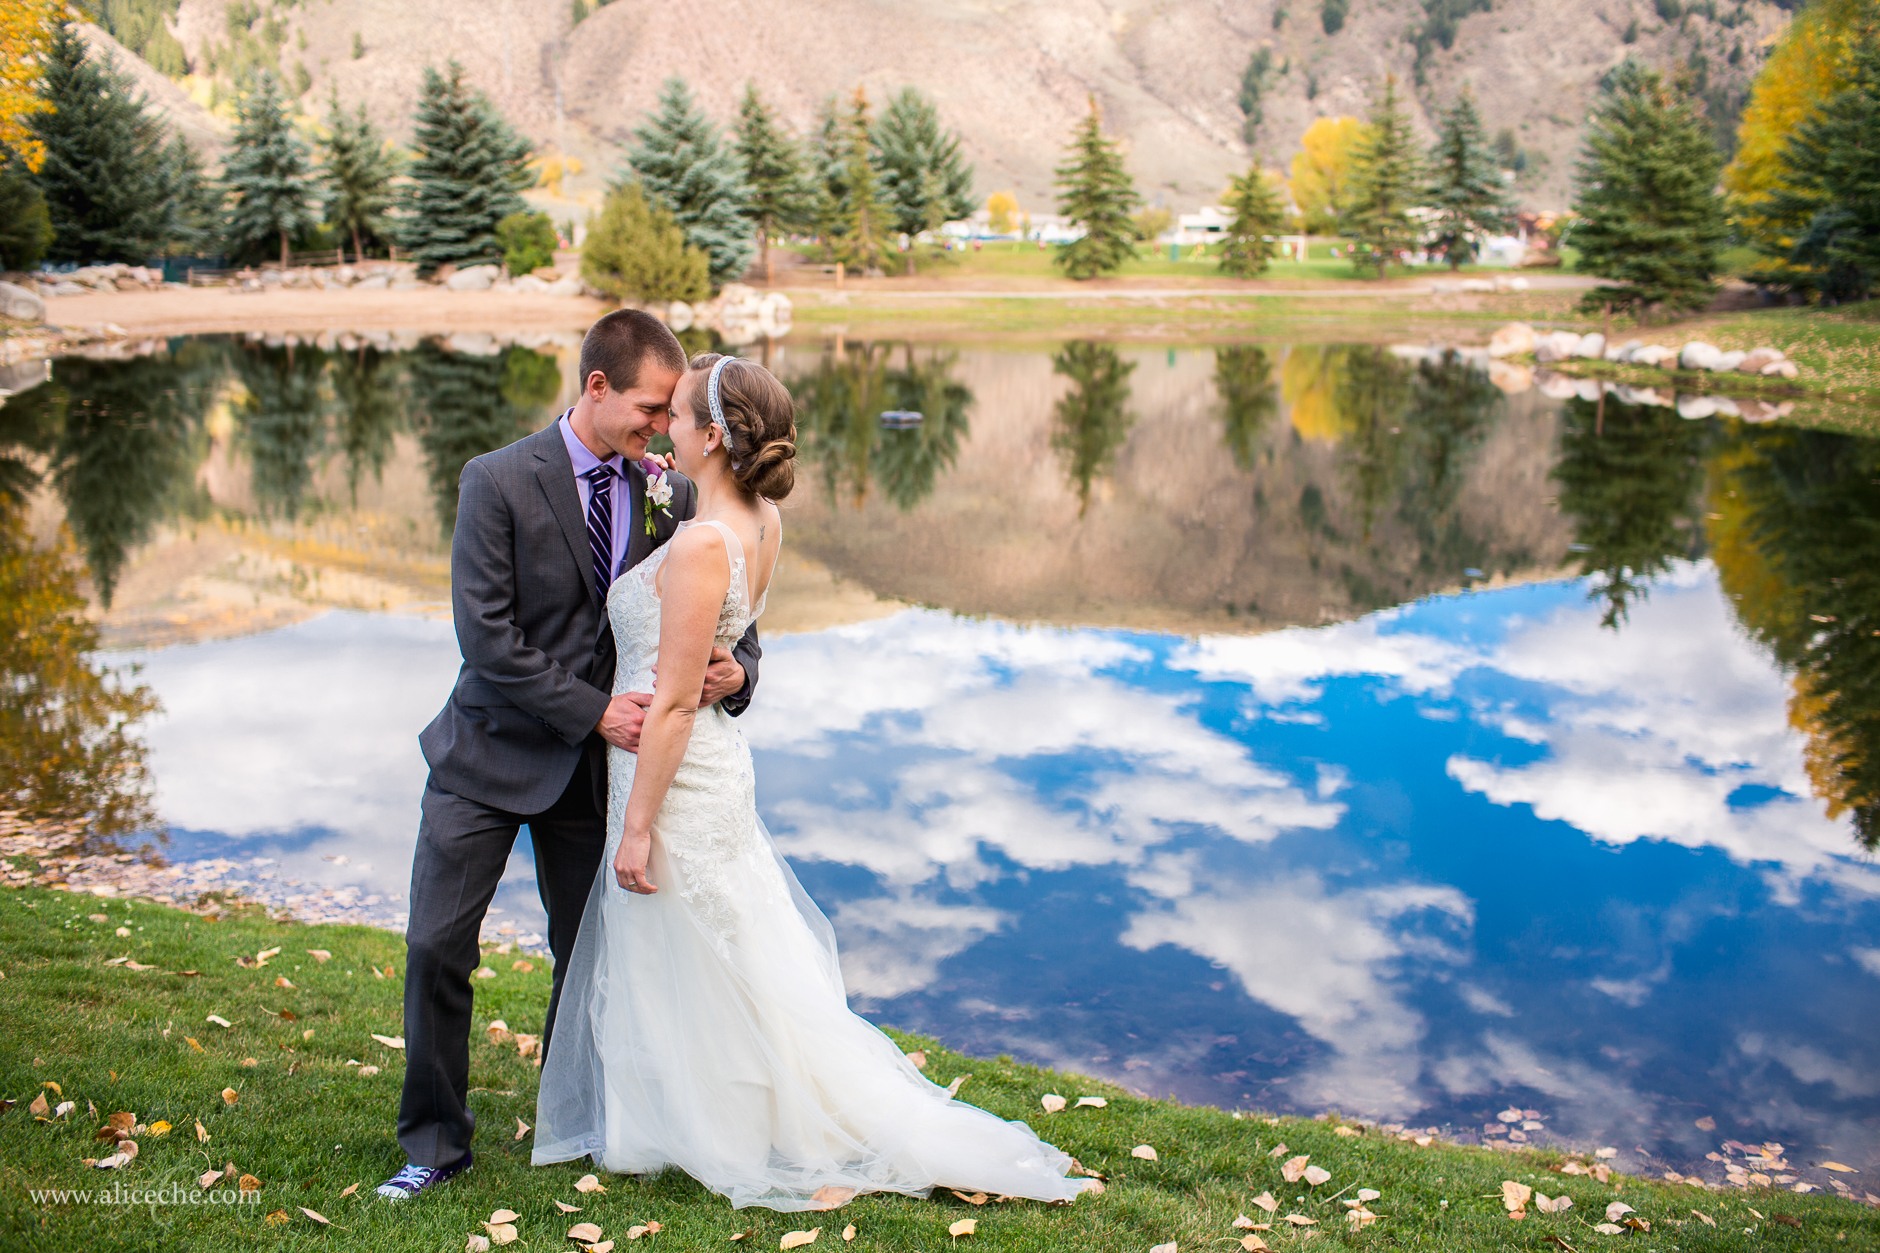 Eagle Vail Pavilion Wedding Destination Photographer Stunning Reflection with Clouds and Gorgeous Couple